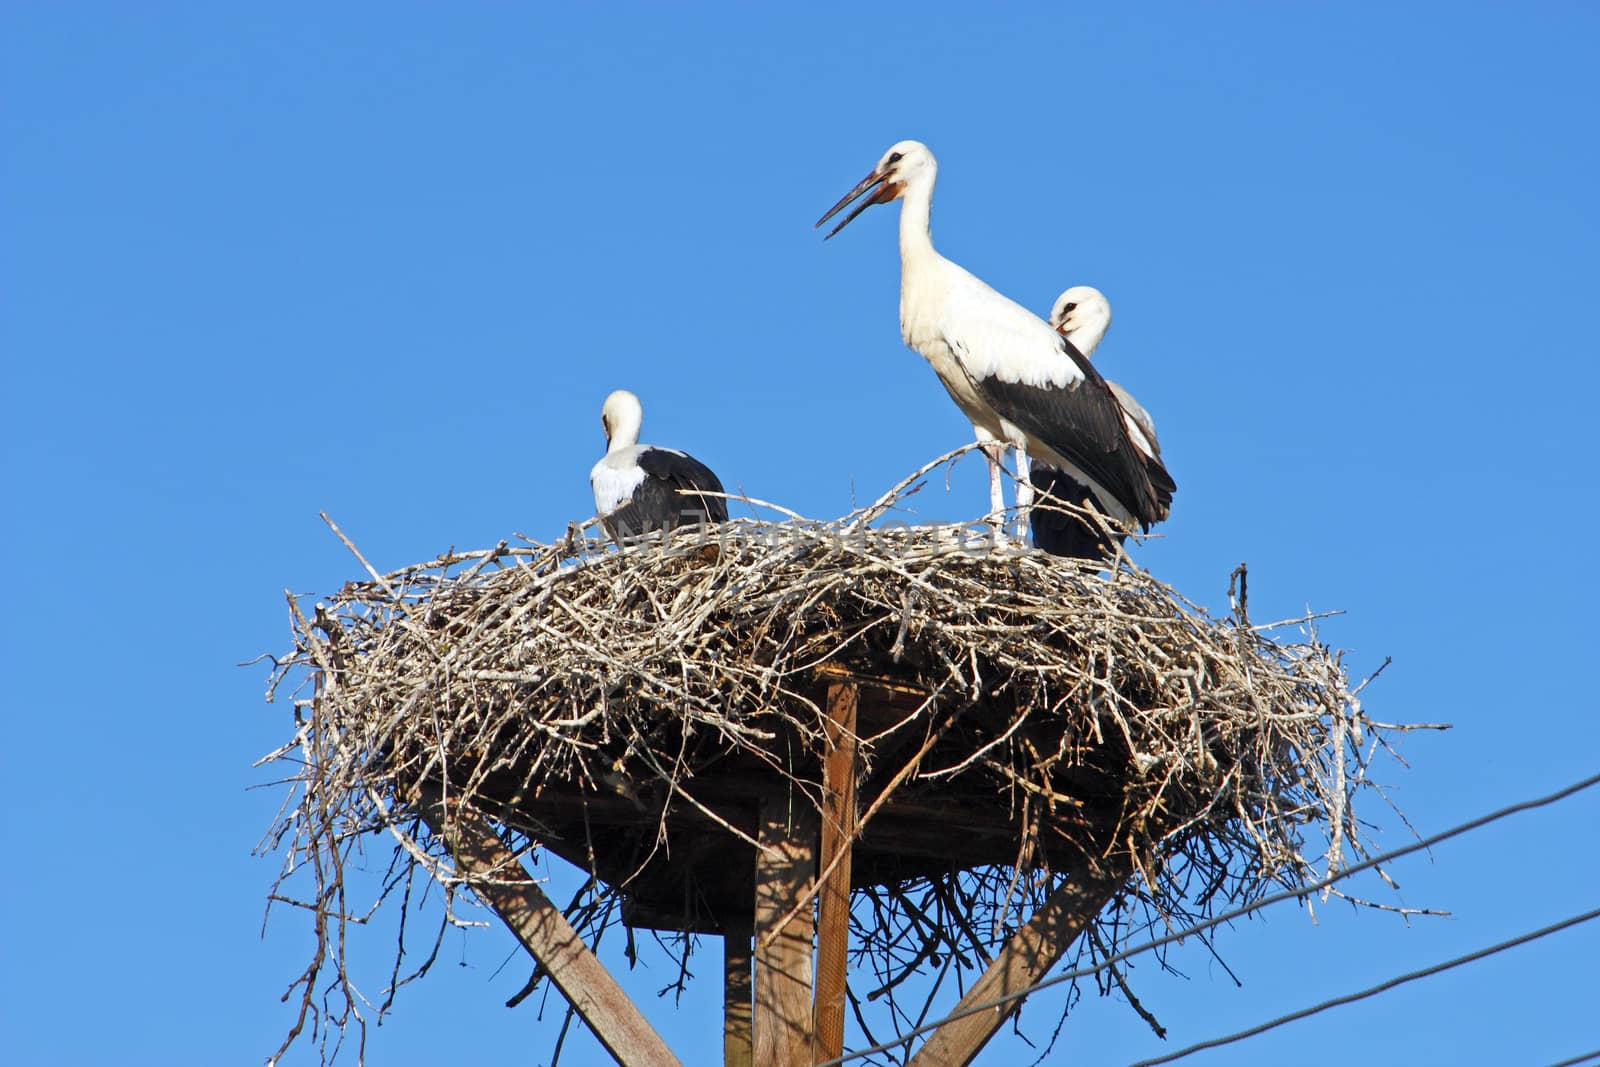 Three storks lay in the nest on power pole